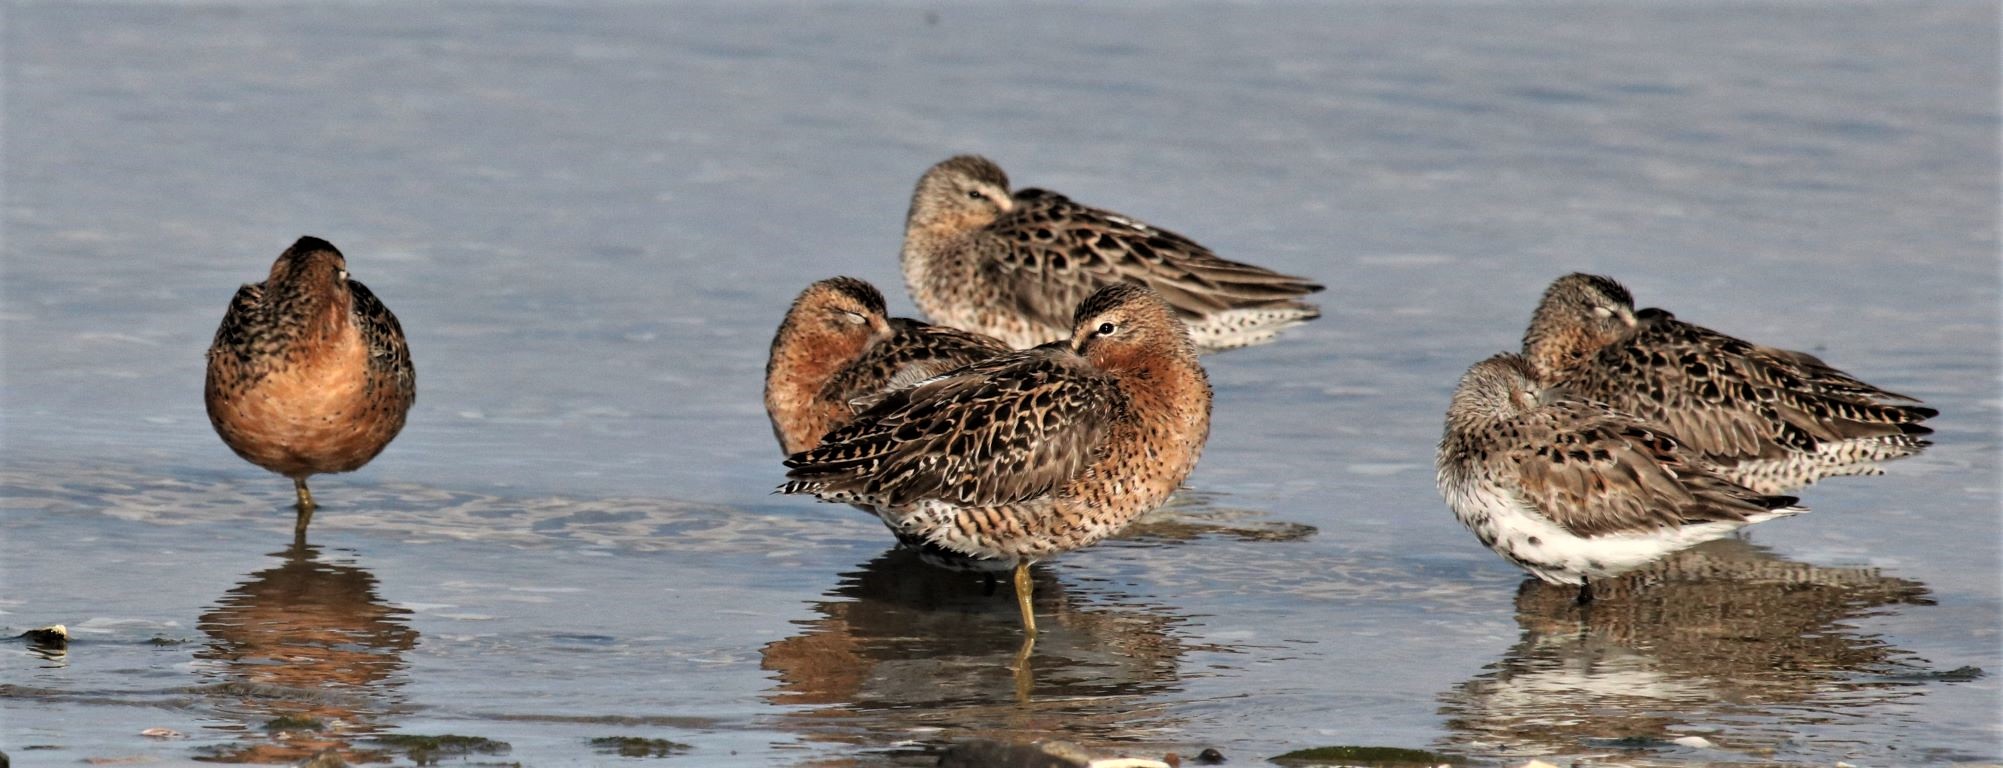 Resting Red Knots by Marge Barham